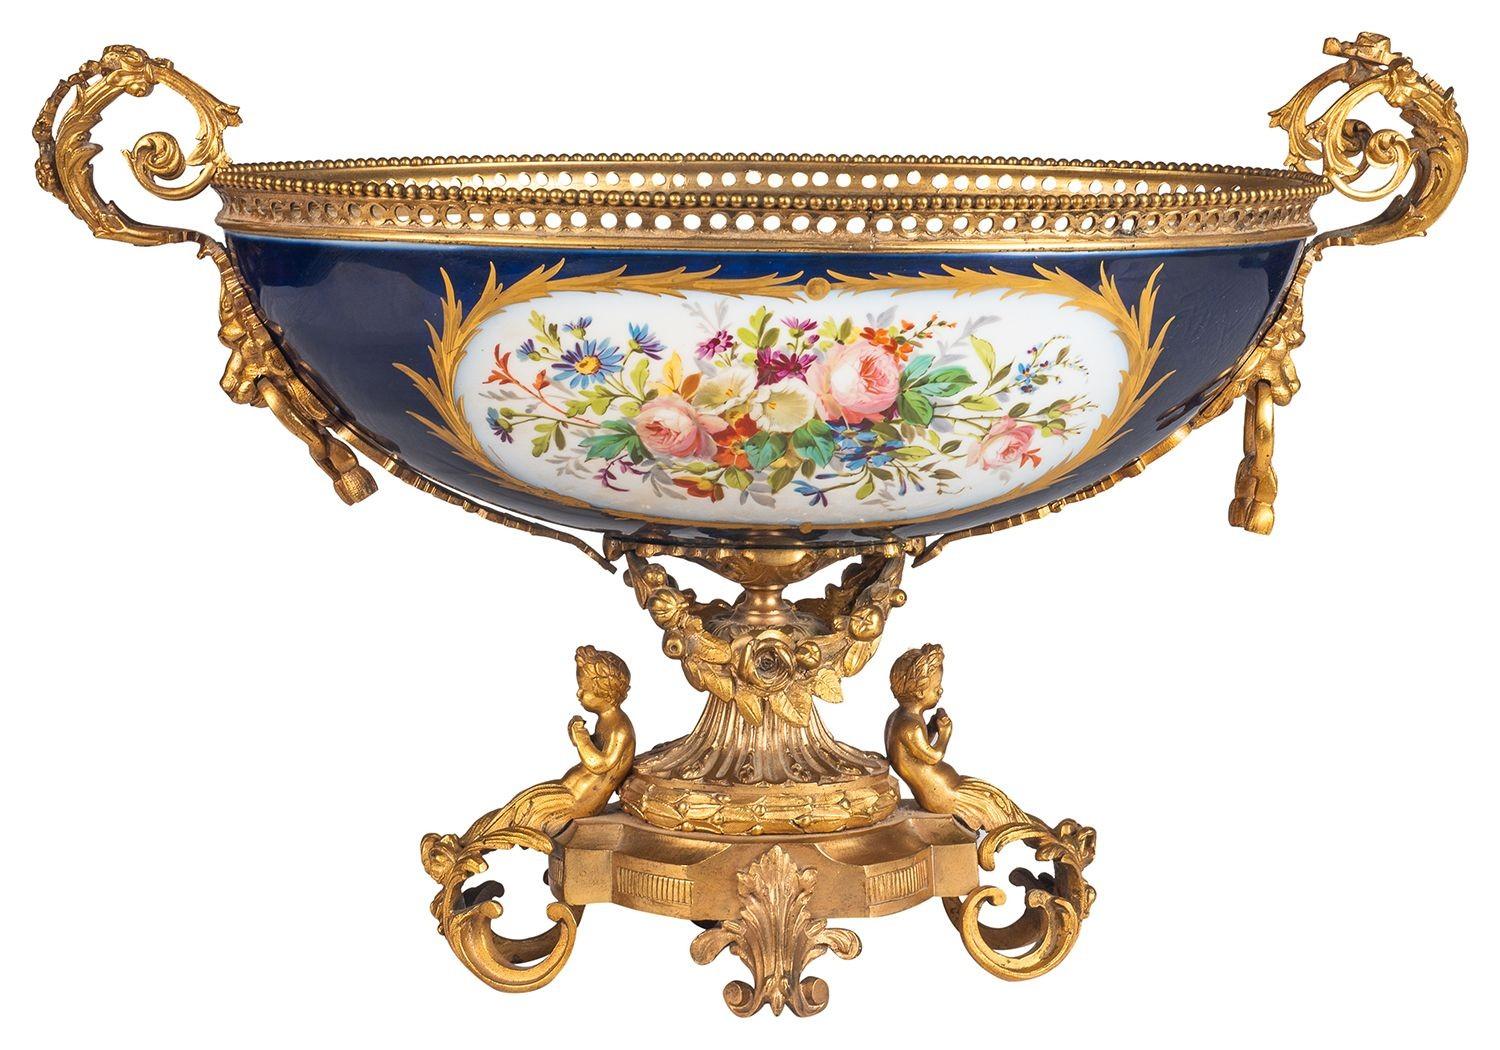 A very good quality French Sevres porcelain comport, having wonderful gilded ormolu scrolling foliate mounts, with cherubs seated , the cobalt blue ground porcelain with inset hand painted panels depicting a scene of a young lady being taught to